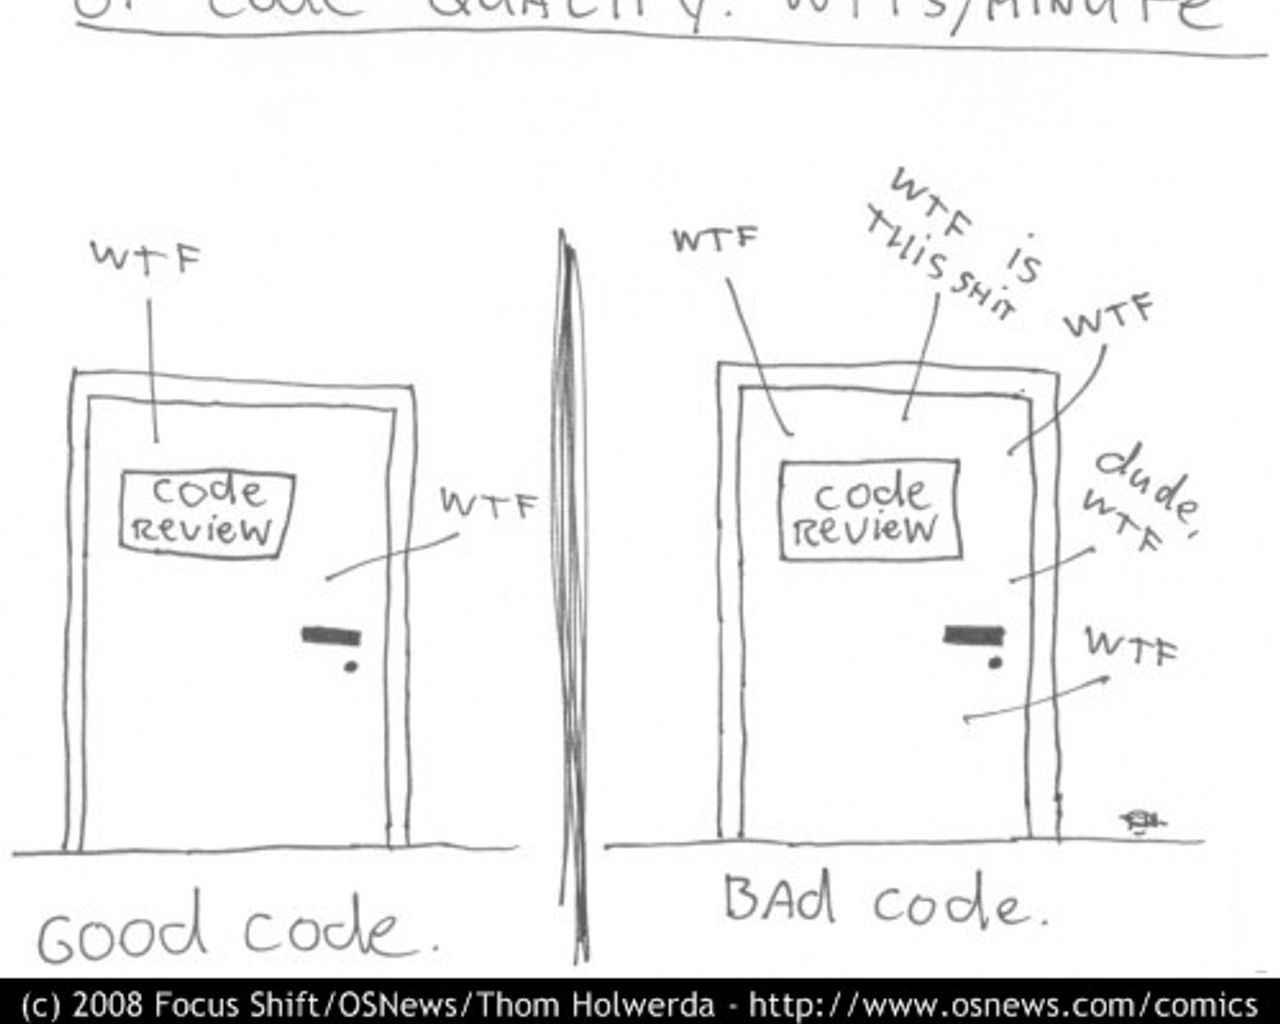 programmers reading code behind two doors, one with more cursing than the other, correlating code quality and cursing